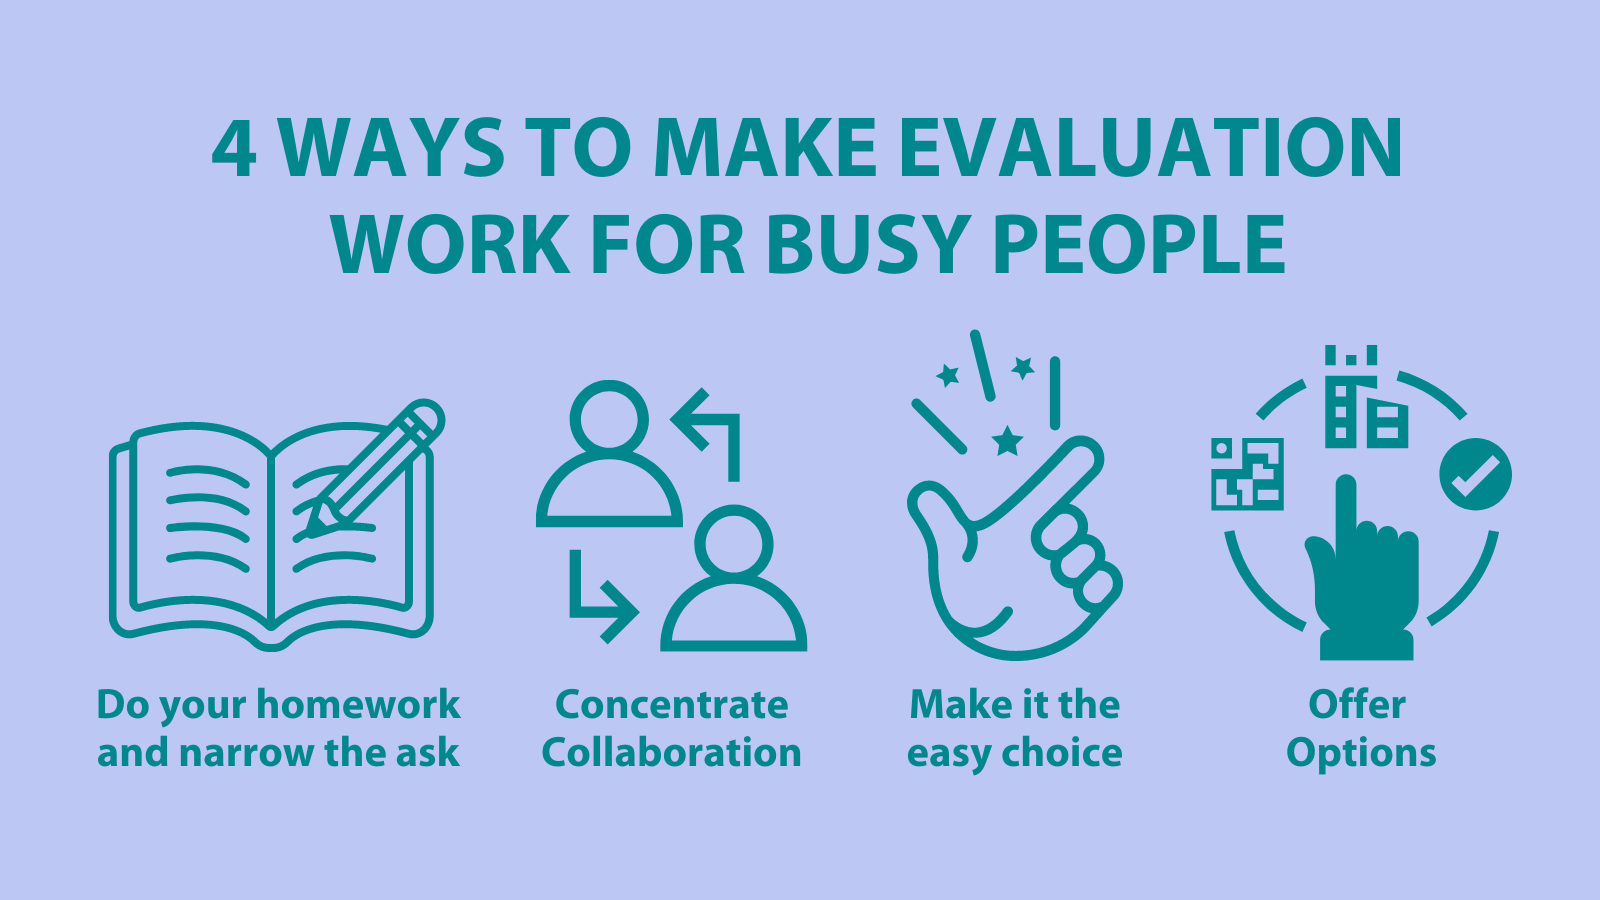 Image of four icons demonstrating each of the 4 tips for making evaluation work for busy people: 1) do you homework and narrow the ask 2) concentrate collaboration 3) make it the easy choice and 4) offer options